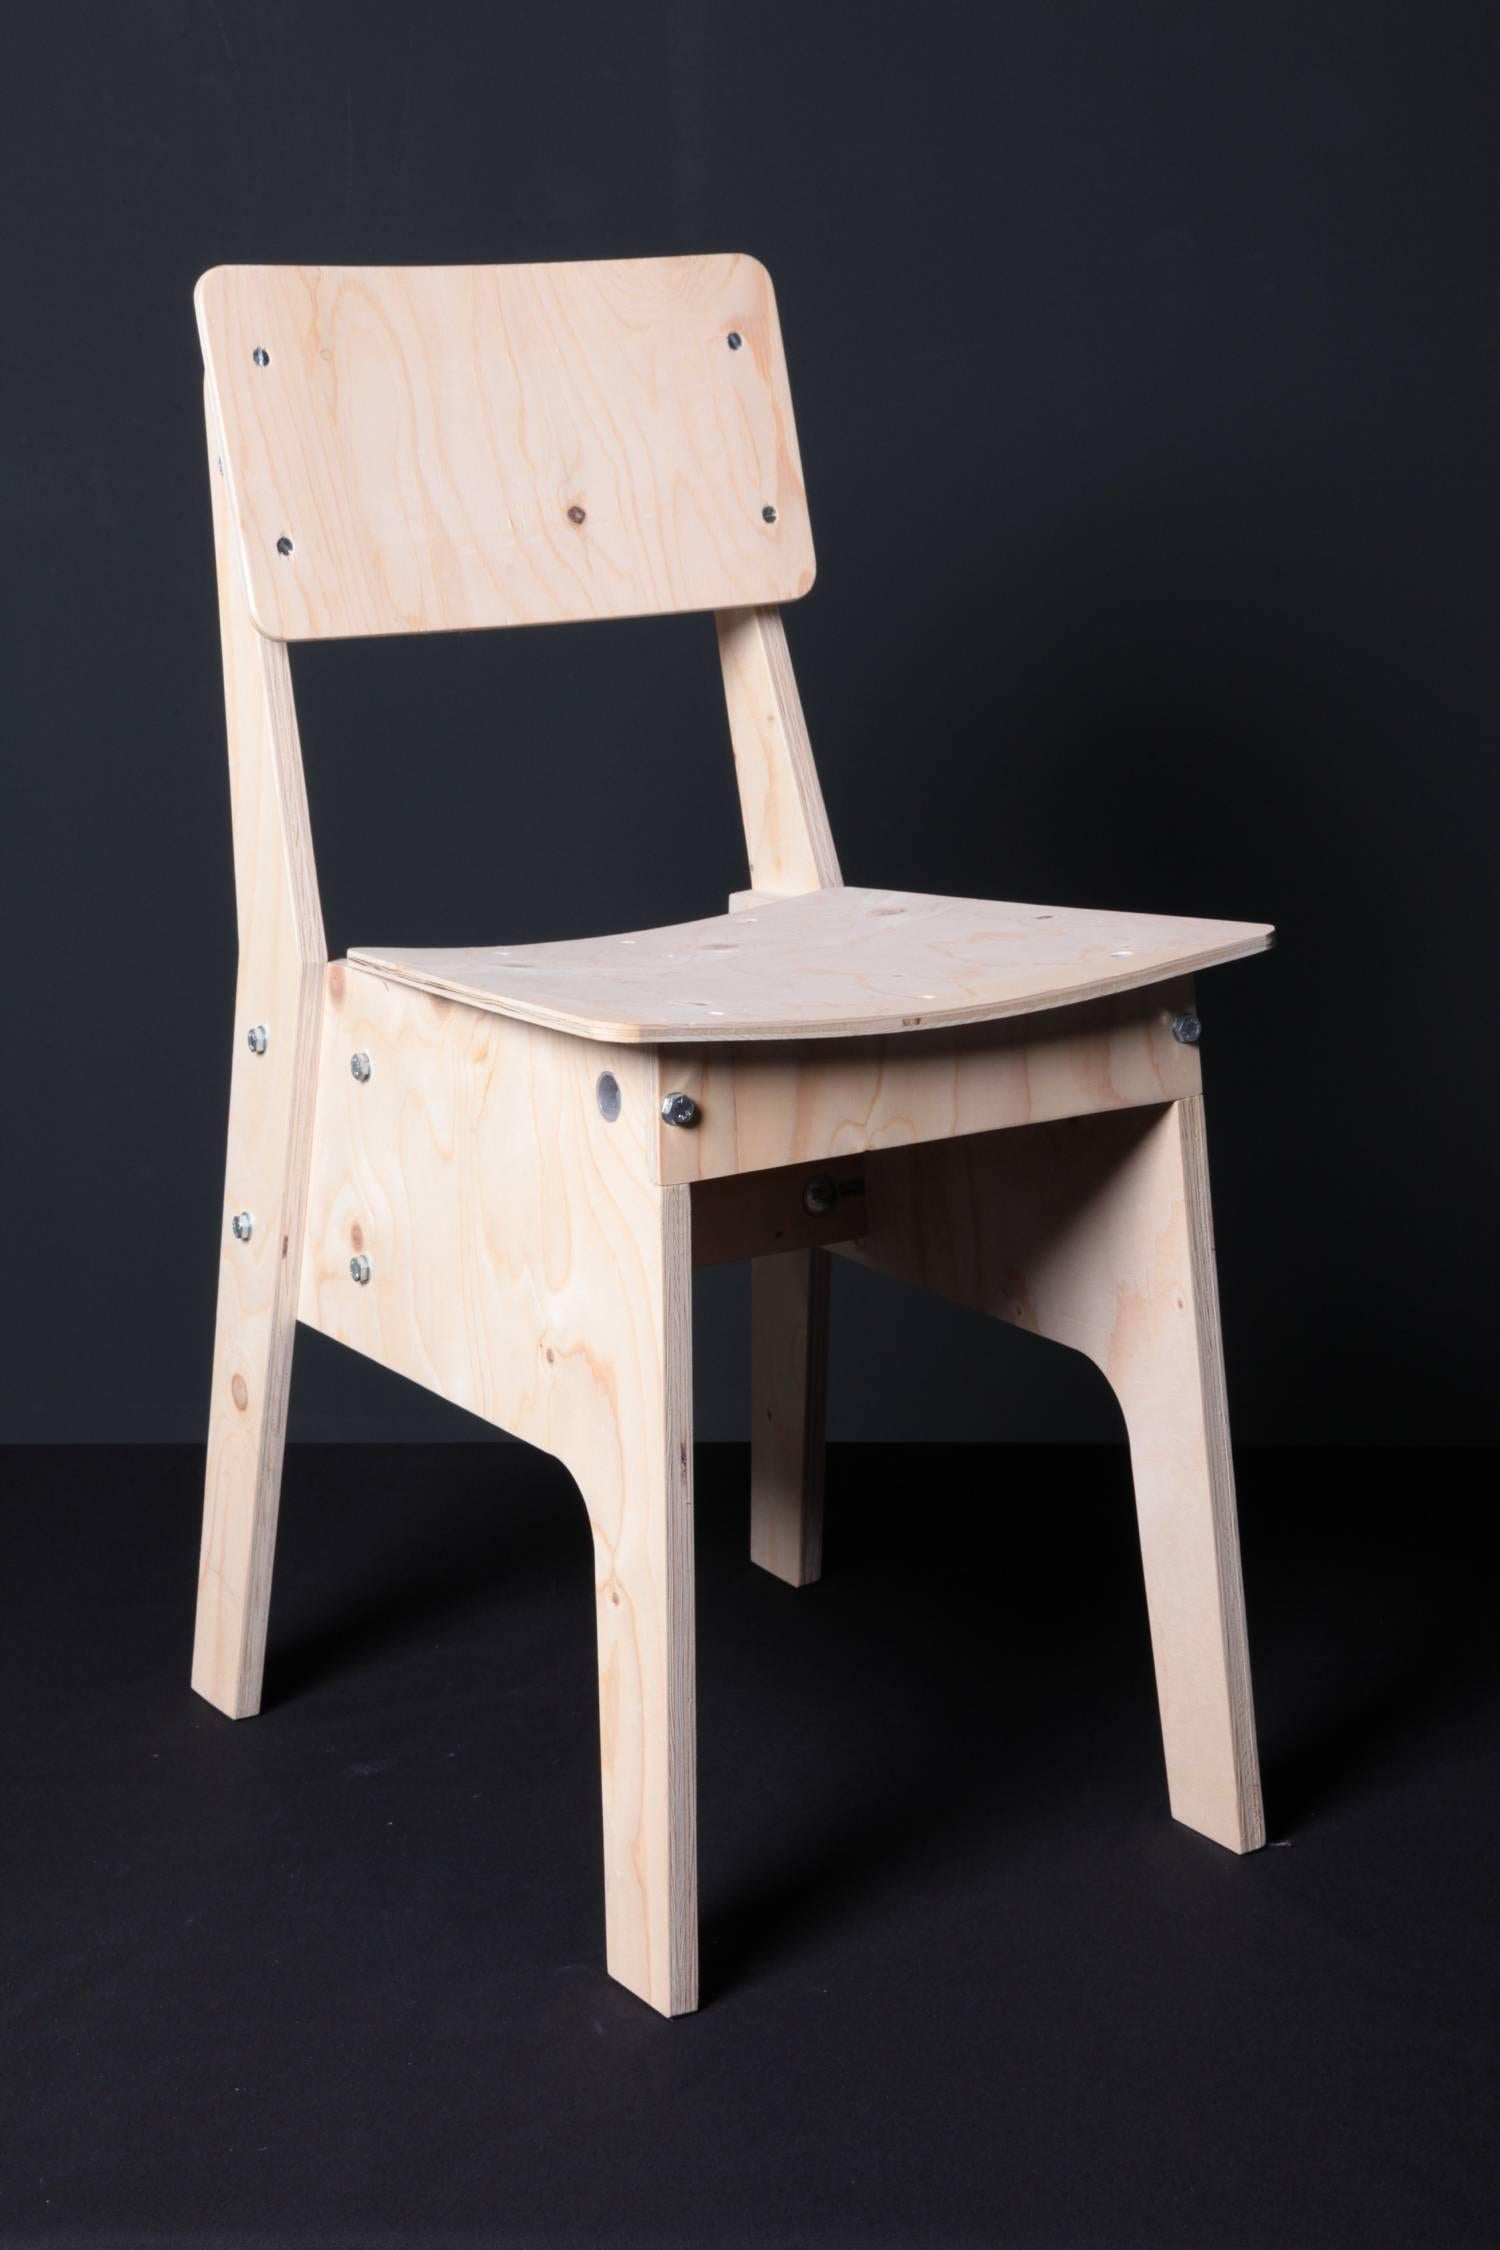 Plywood chair, available in many different colors.